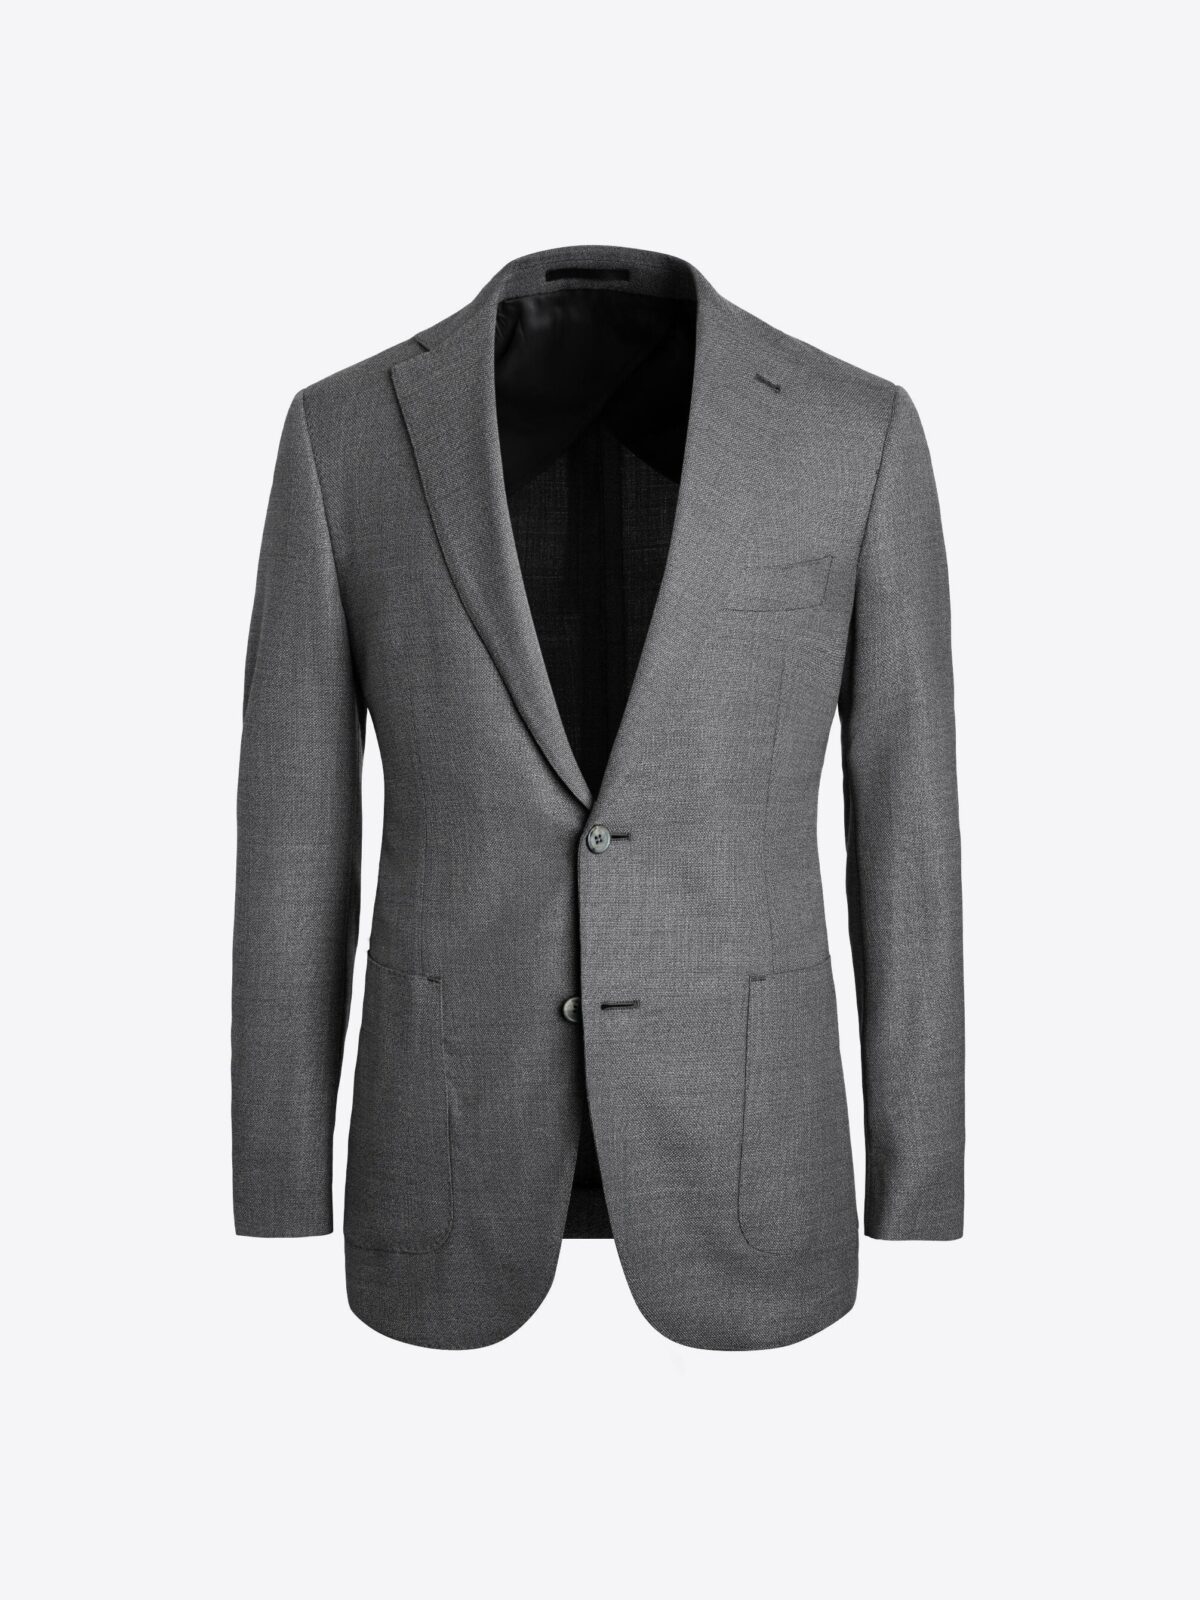 Bedford Grey Micro Texture Stretch Wool Suit Jacket - Custom Fit